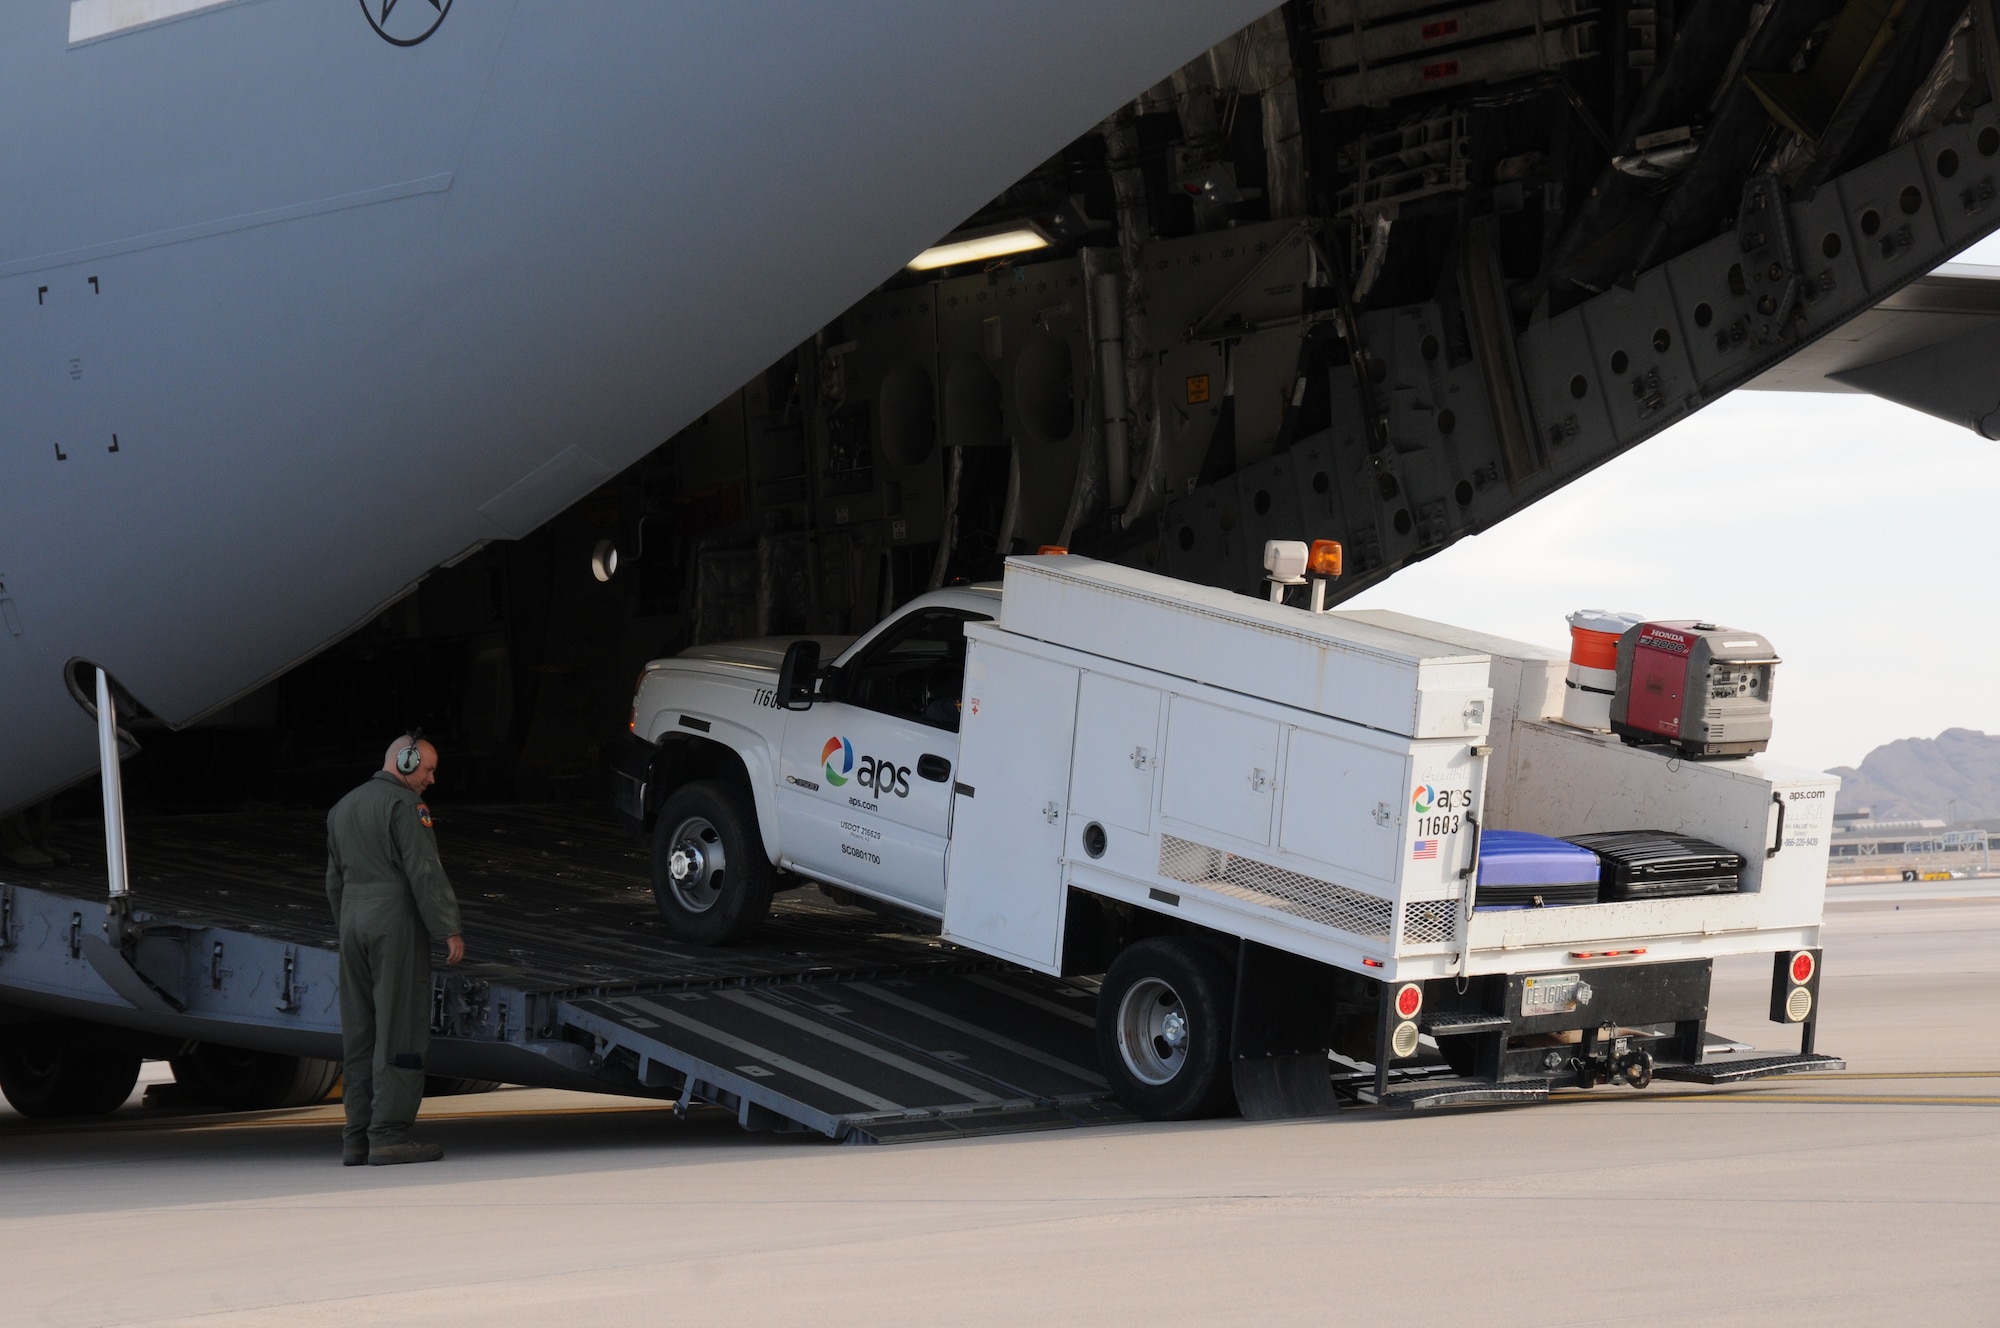 An Air Force loadmaster assigned to 445th Airlift Wing of the Air Force Reserve, load an Arizona Public Service utility vehicle onto a C-17 Globemaster III at the 161st Air Refueling Wing, Phoenix on November 2, 2012.  The 161st ARW will facilitate the loading and transportation of Salt River Project and Arizona Public Service line crews, support staff and required vehicles in efforts to restore power in the aftermath of Hurricane Sandy.   (U.S. Air Force photo by Master Sergeant Kelly Deitloff/Released)